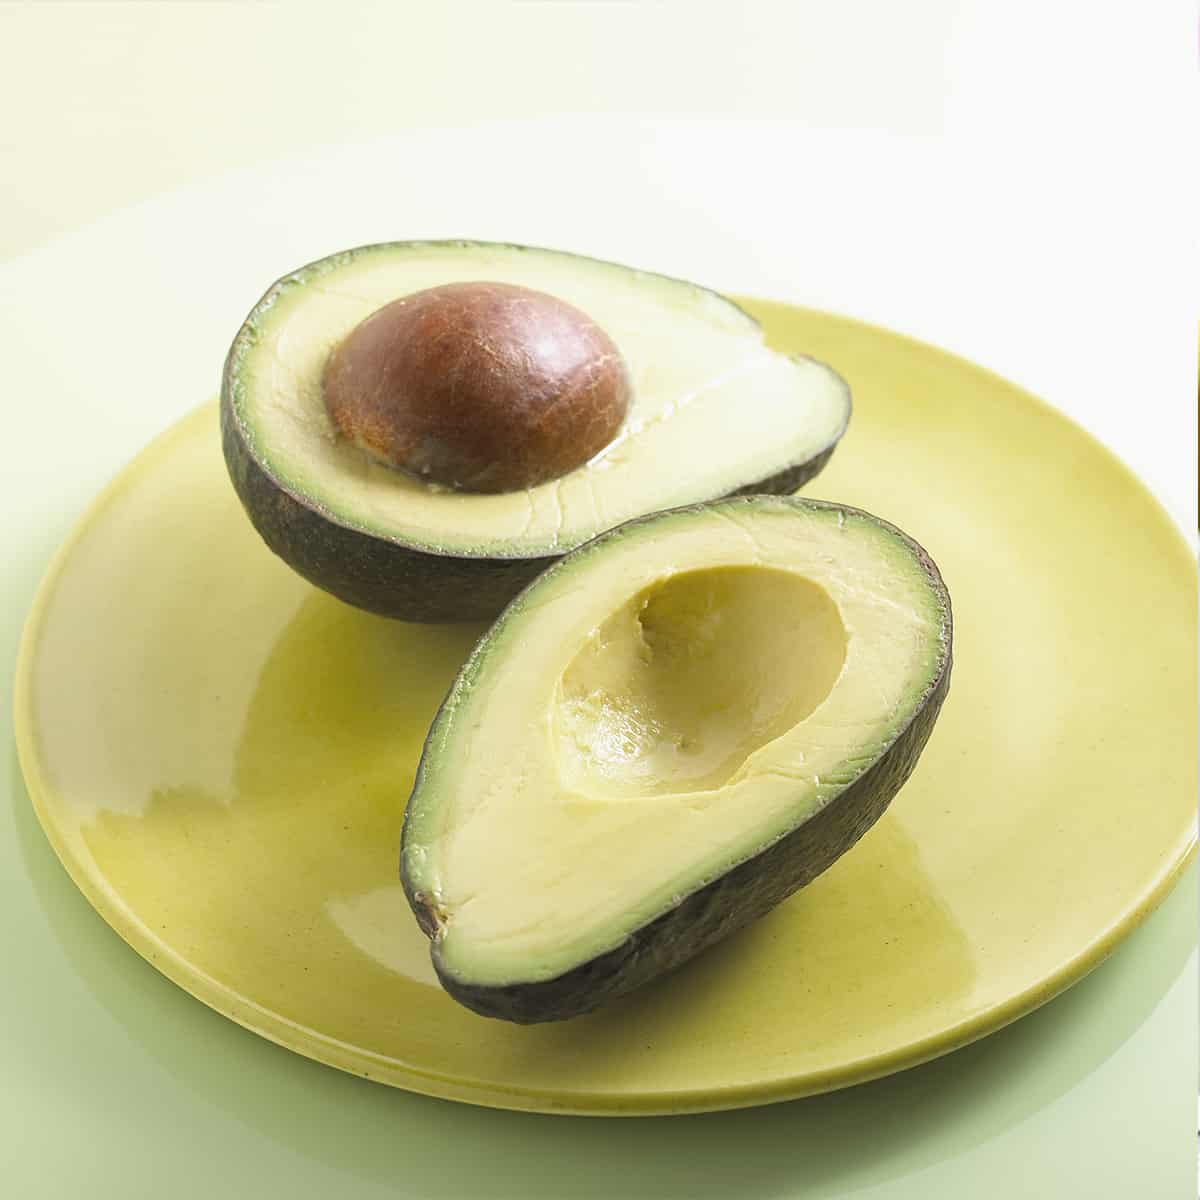 Halved avocado with seed on a yellow plate